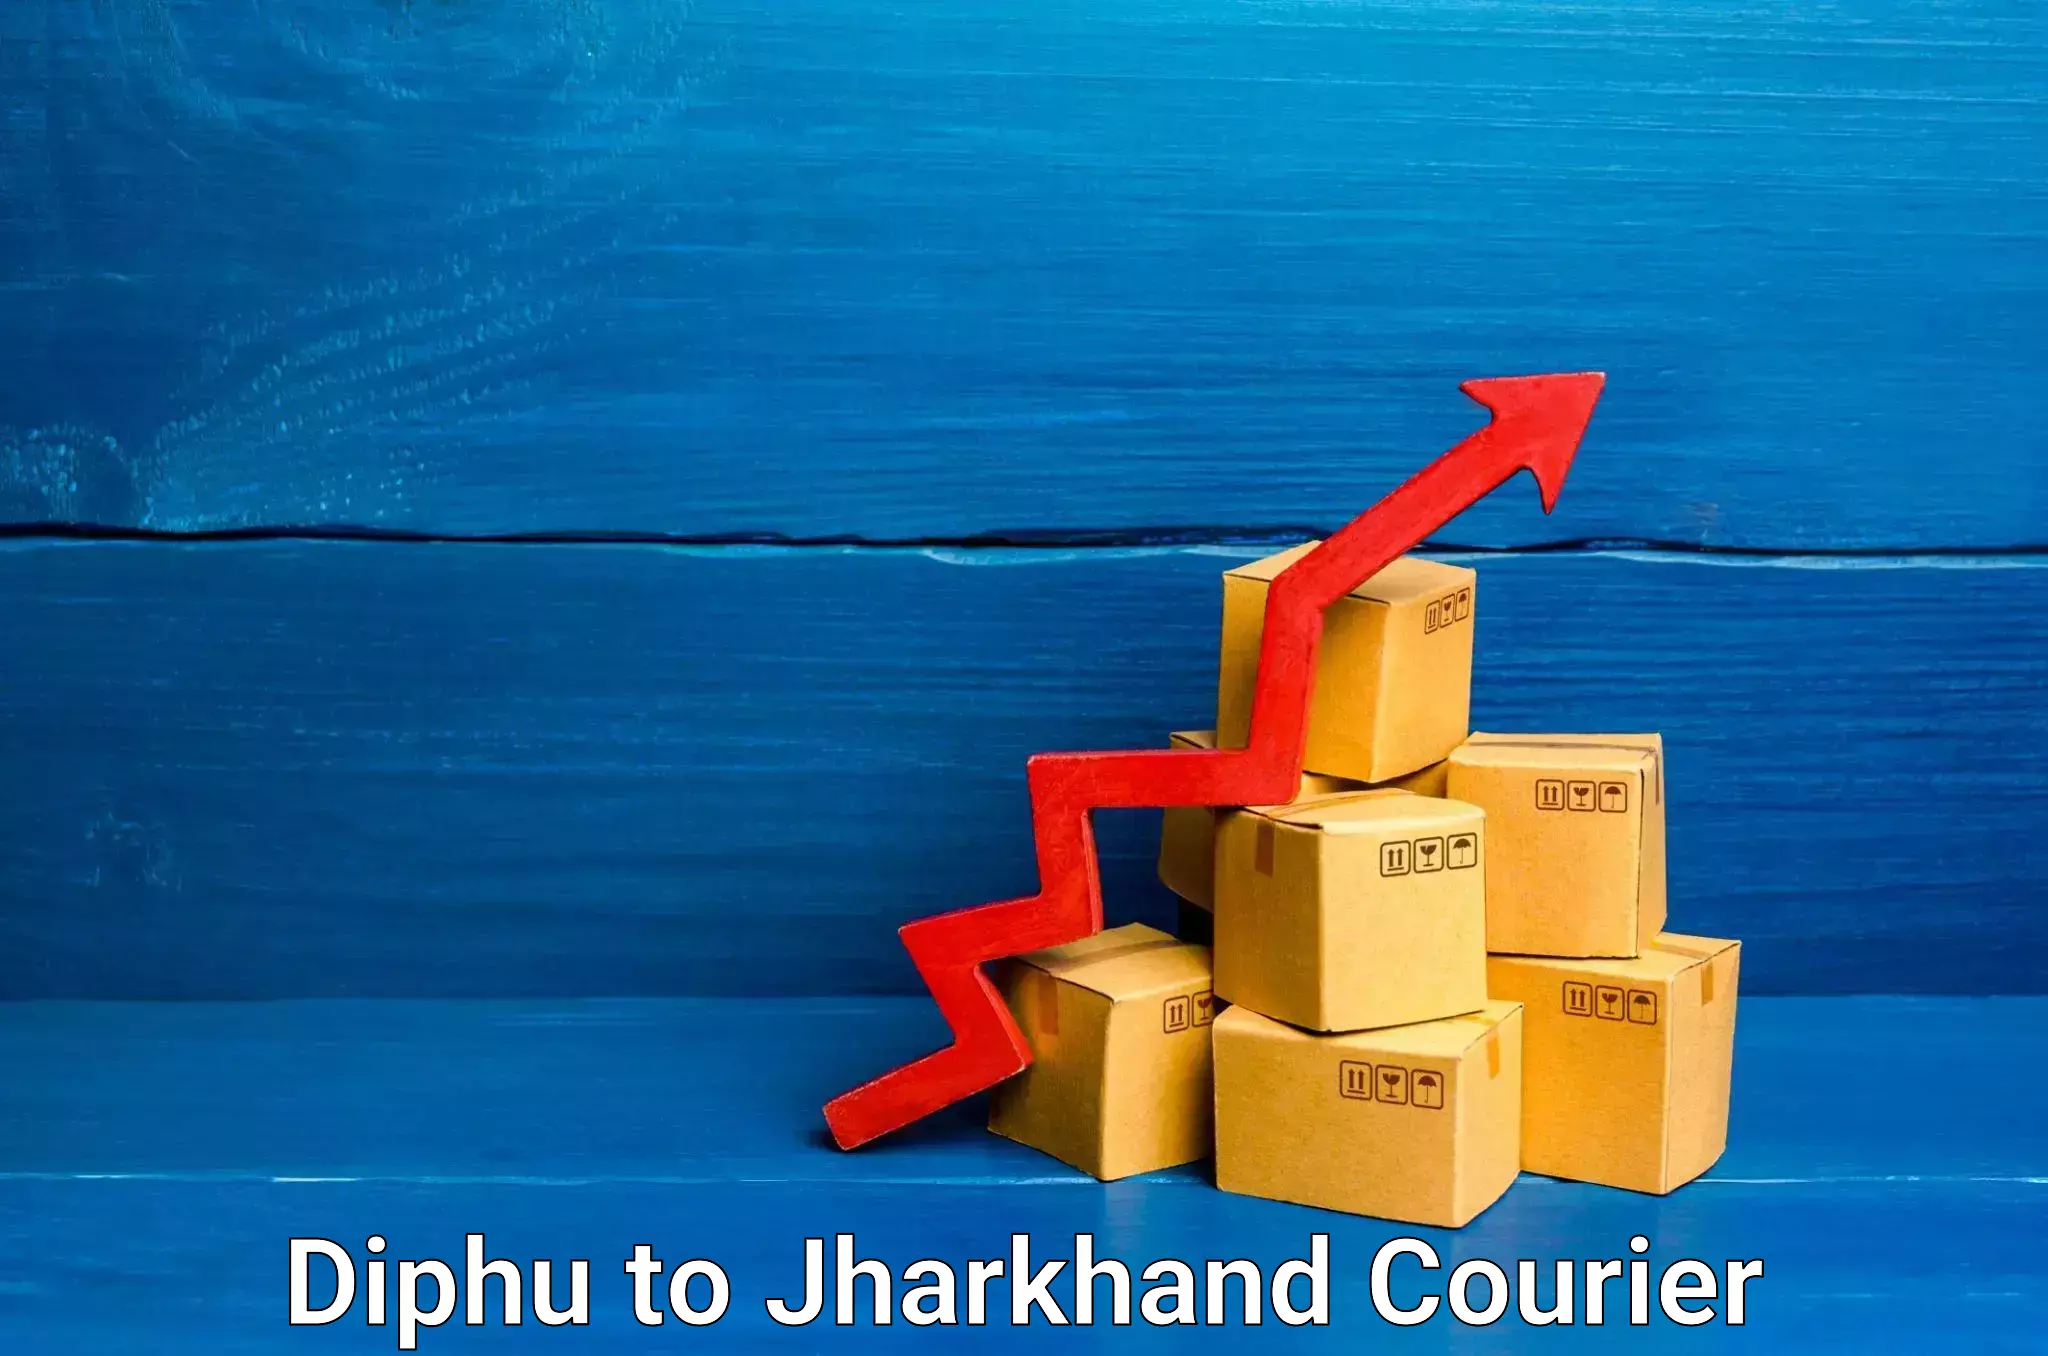 Reliable parcel services Diphu to Bokaro Steel City